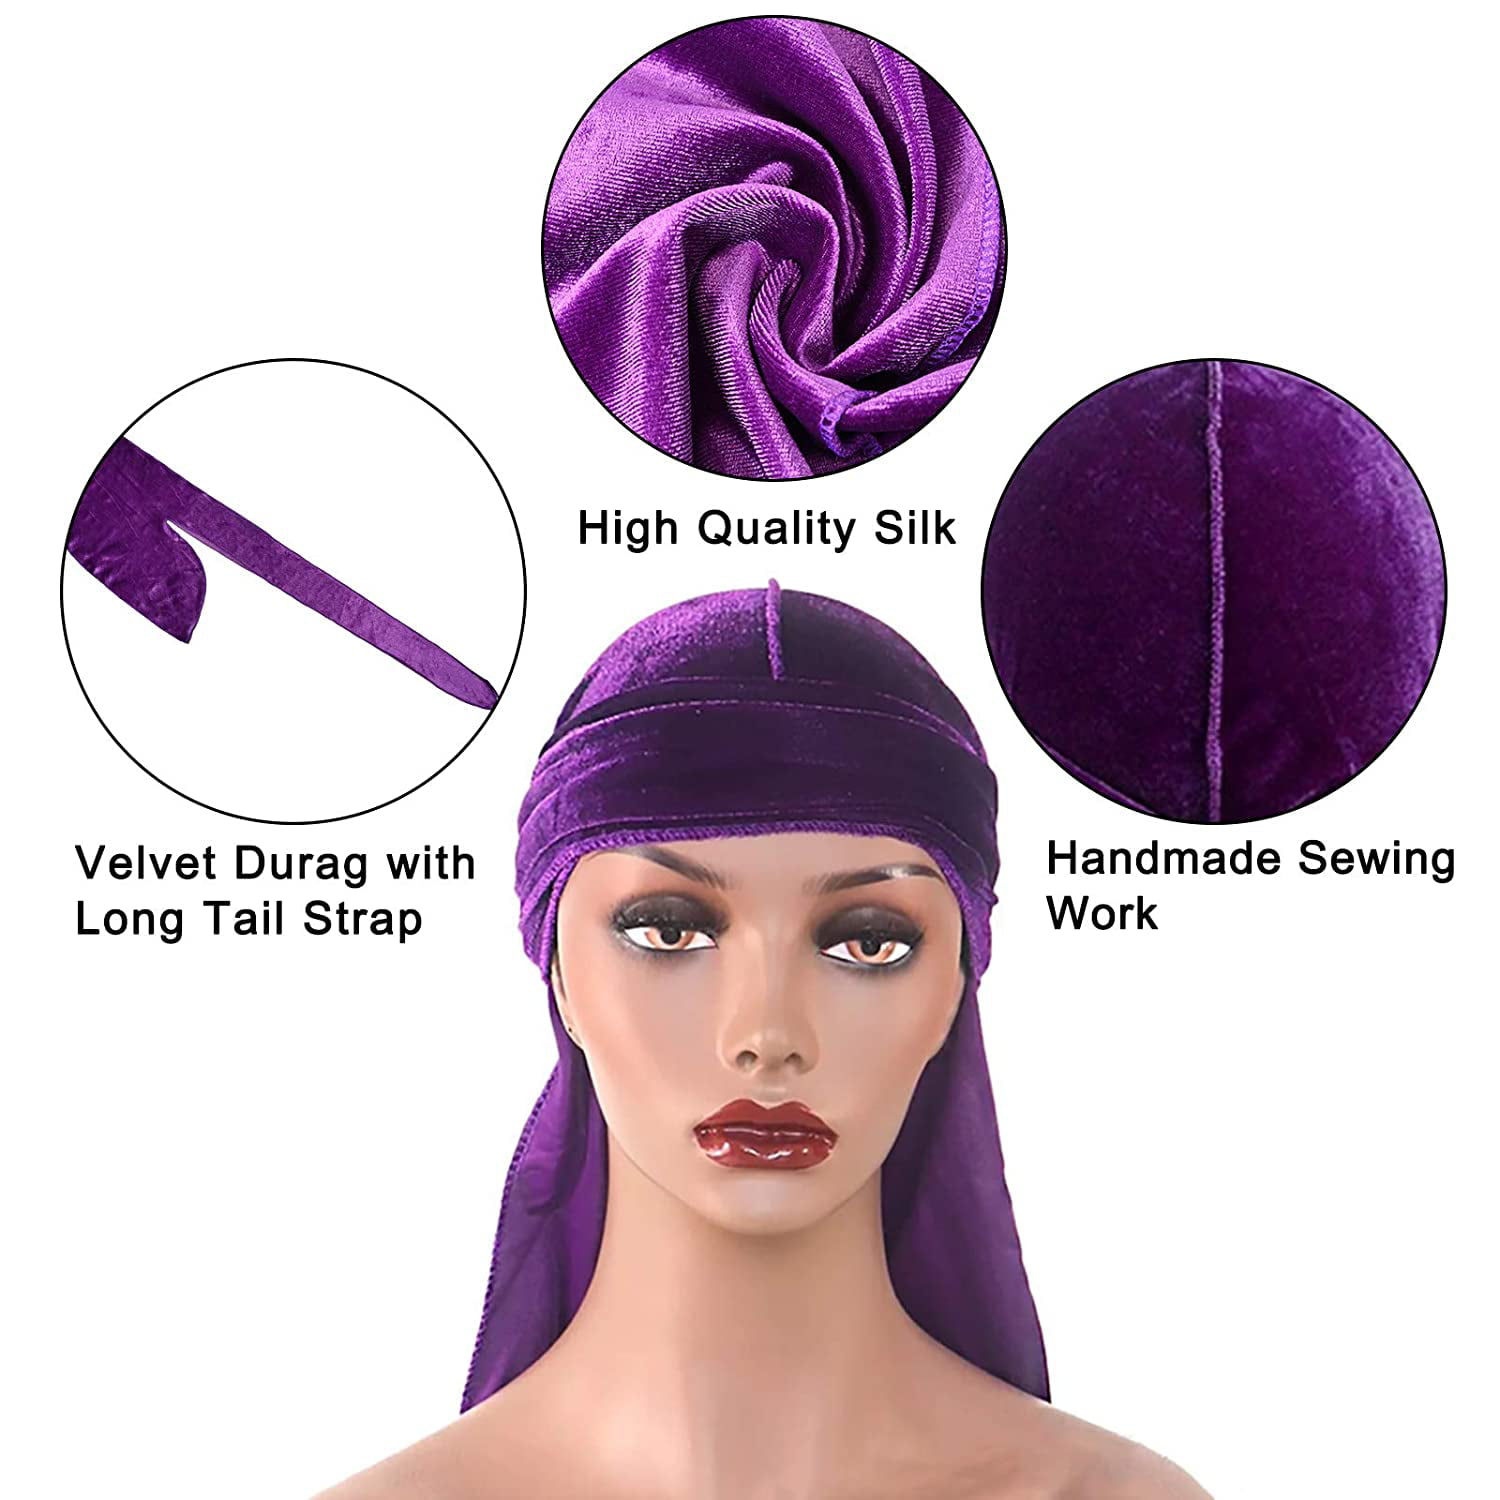 Do Rags Headwraps with 2 Wave Caps Stocking Caps 4PCS Silky Durags Skull Caps for Men Waves Women 